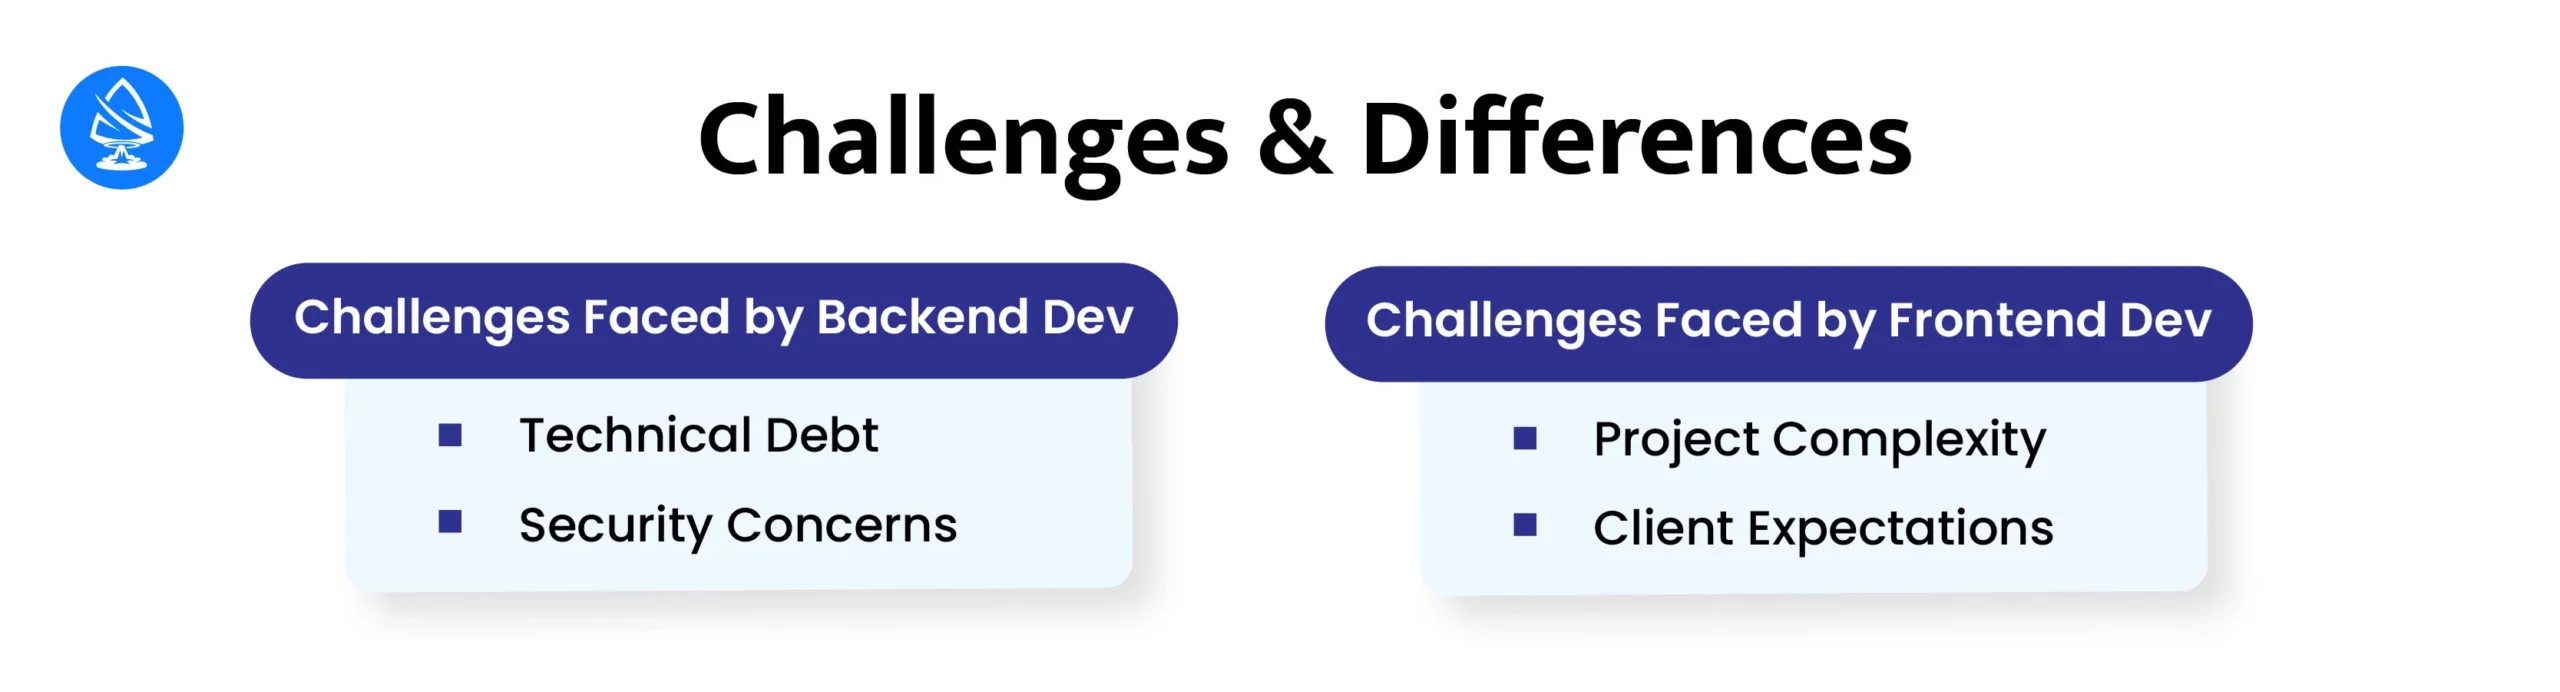 Challenges and Differences 